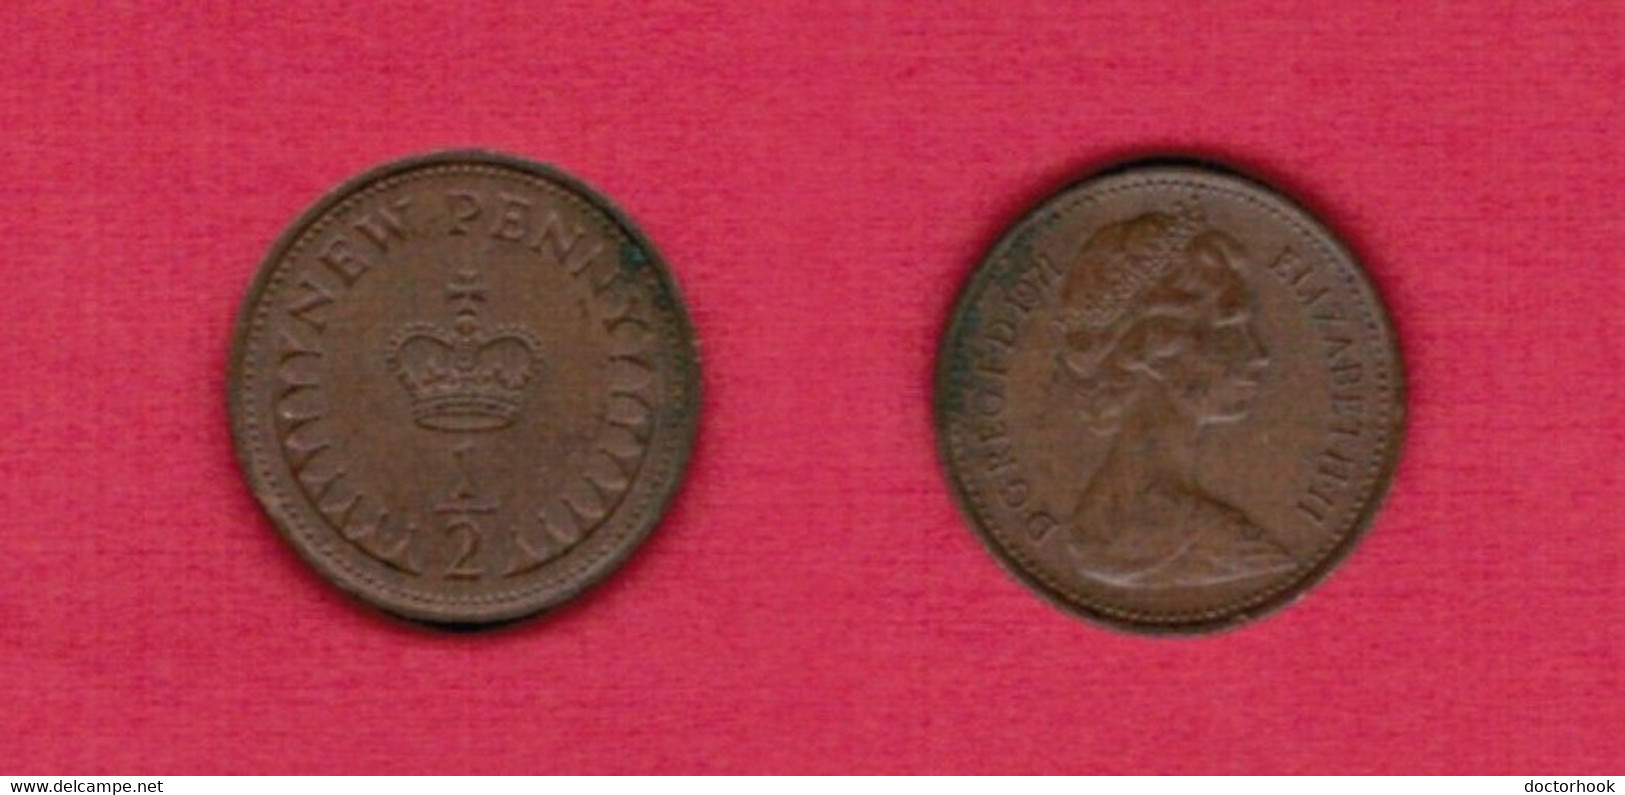 GREAT BRITAIN  1/2 NEW PENNY 1971 (KM # 914) #6867 - 1/2 Penny & 1/2 New Penny